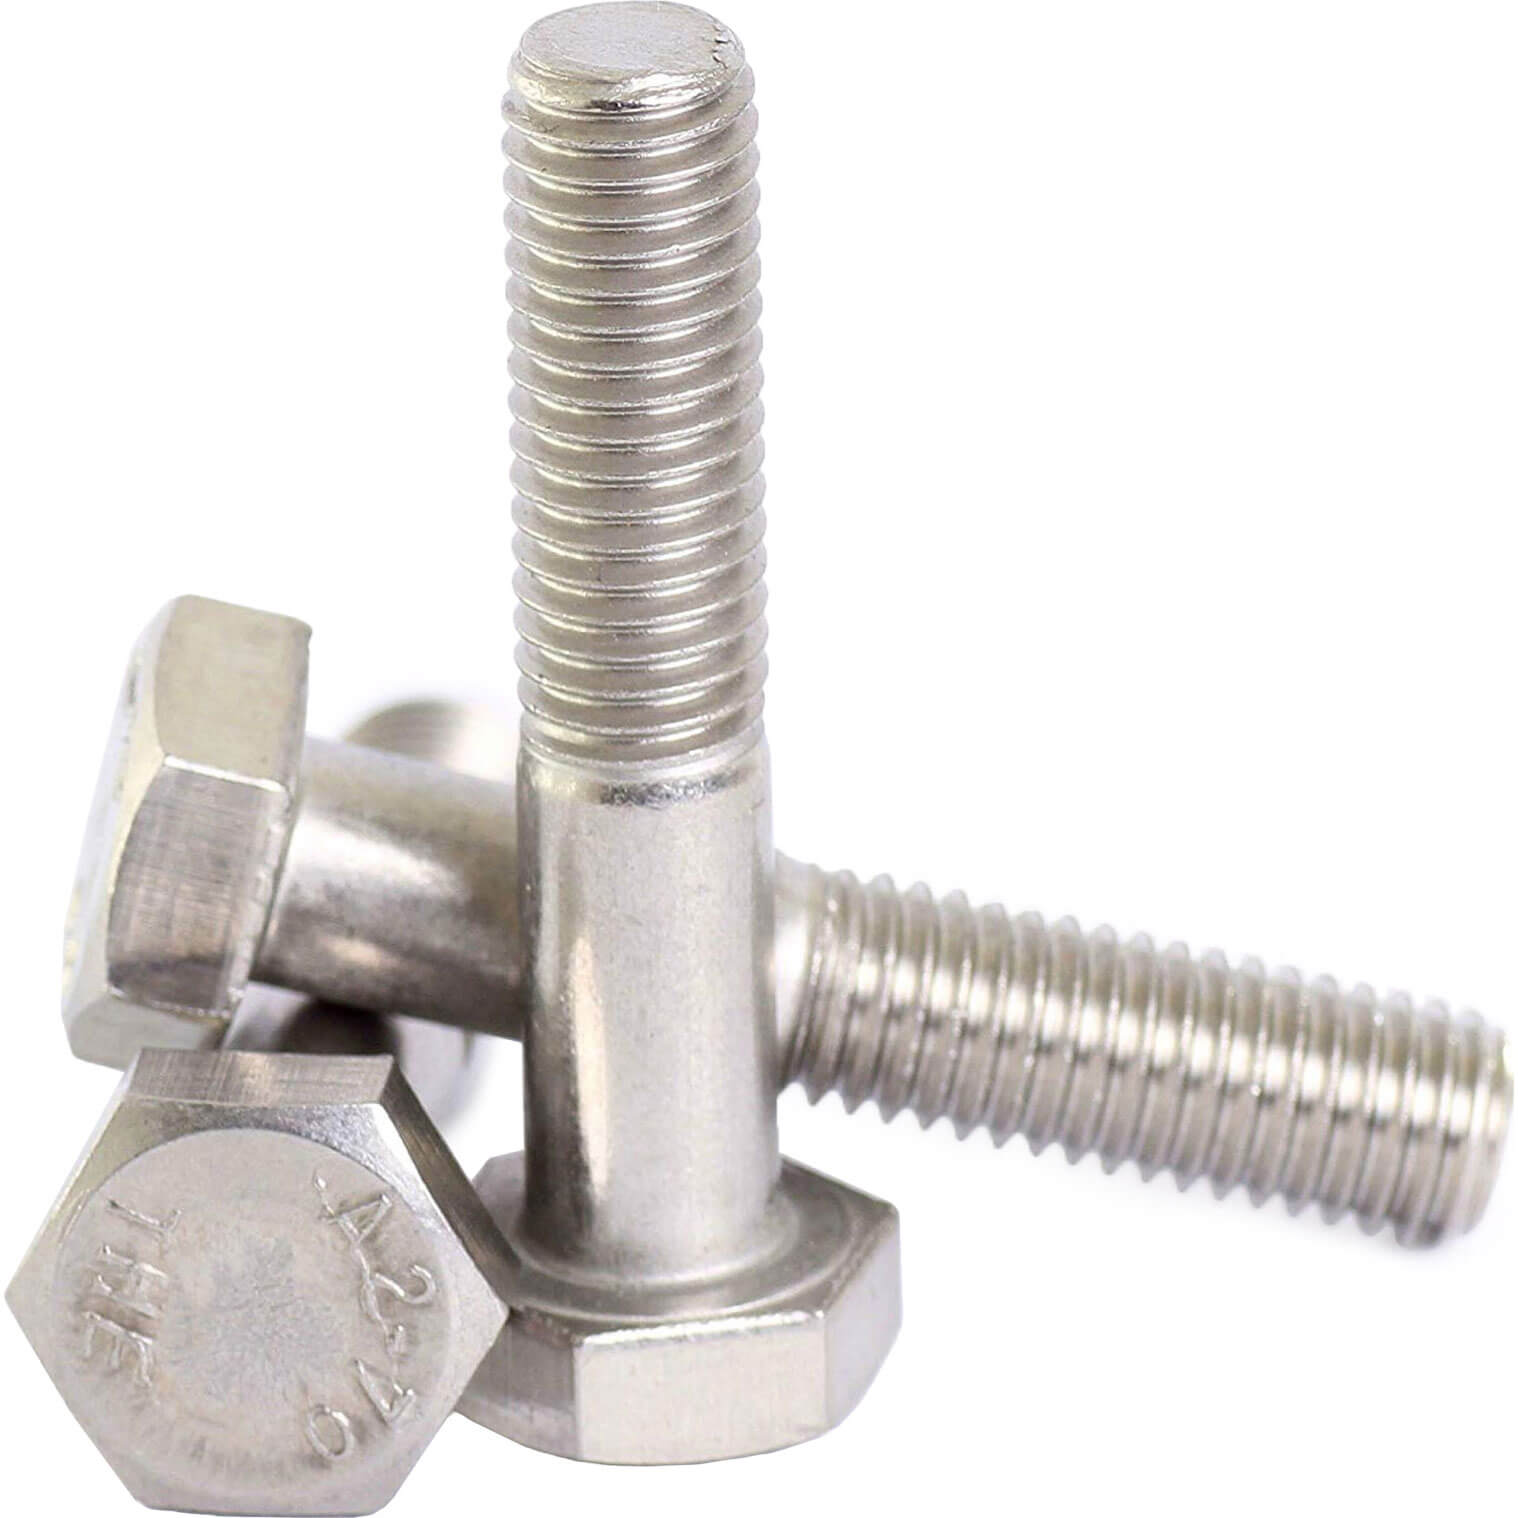 Photos - Nail / Screw / Fastener Sirius Bolts A2 304 Stainless Steel M6 65mm Pack of 1 